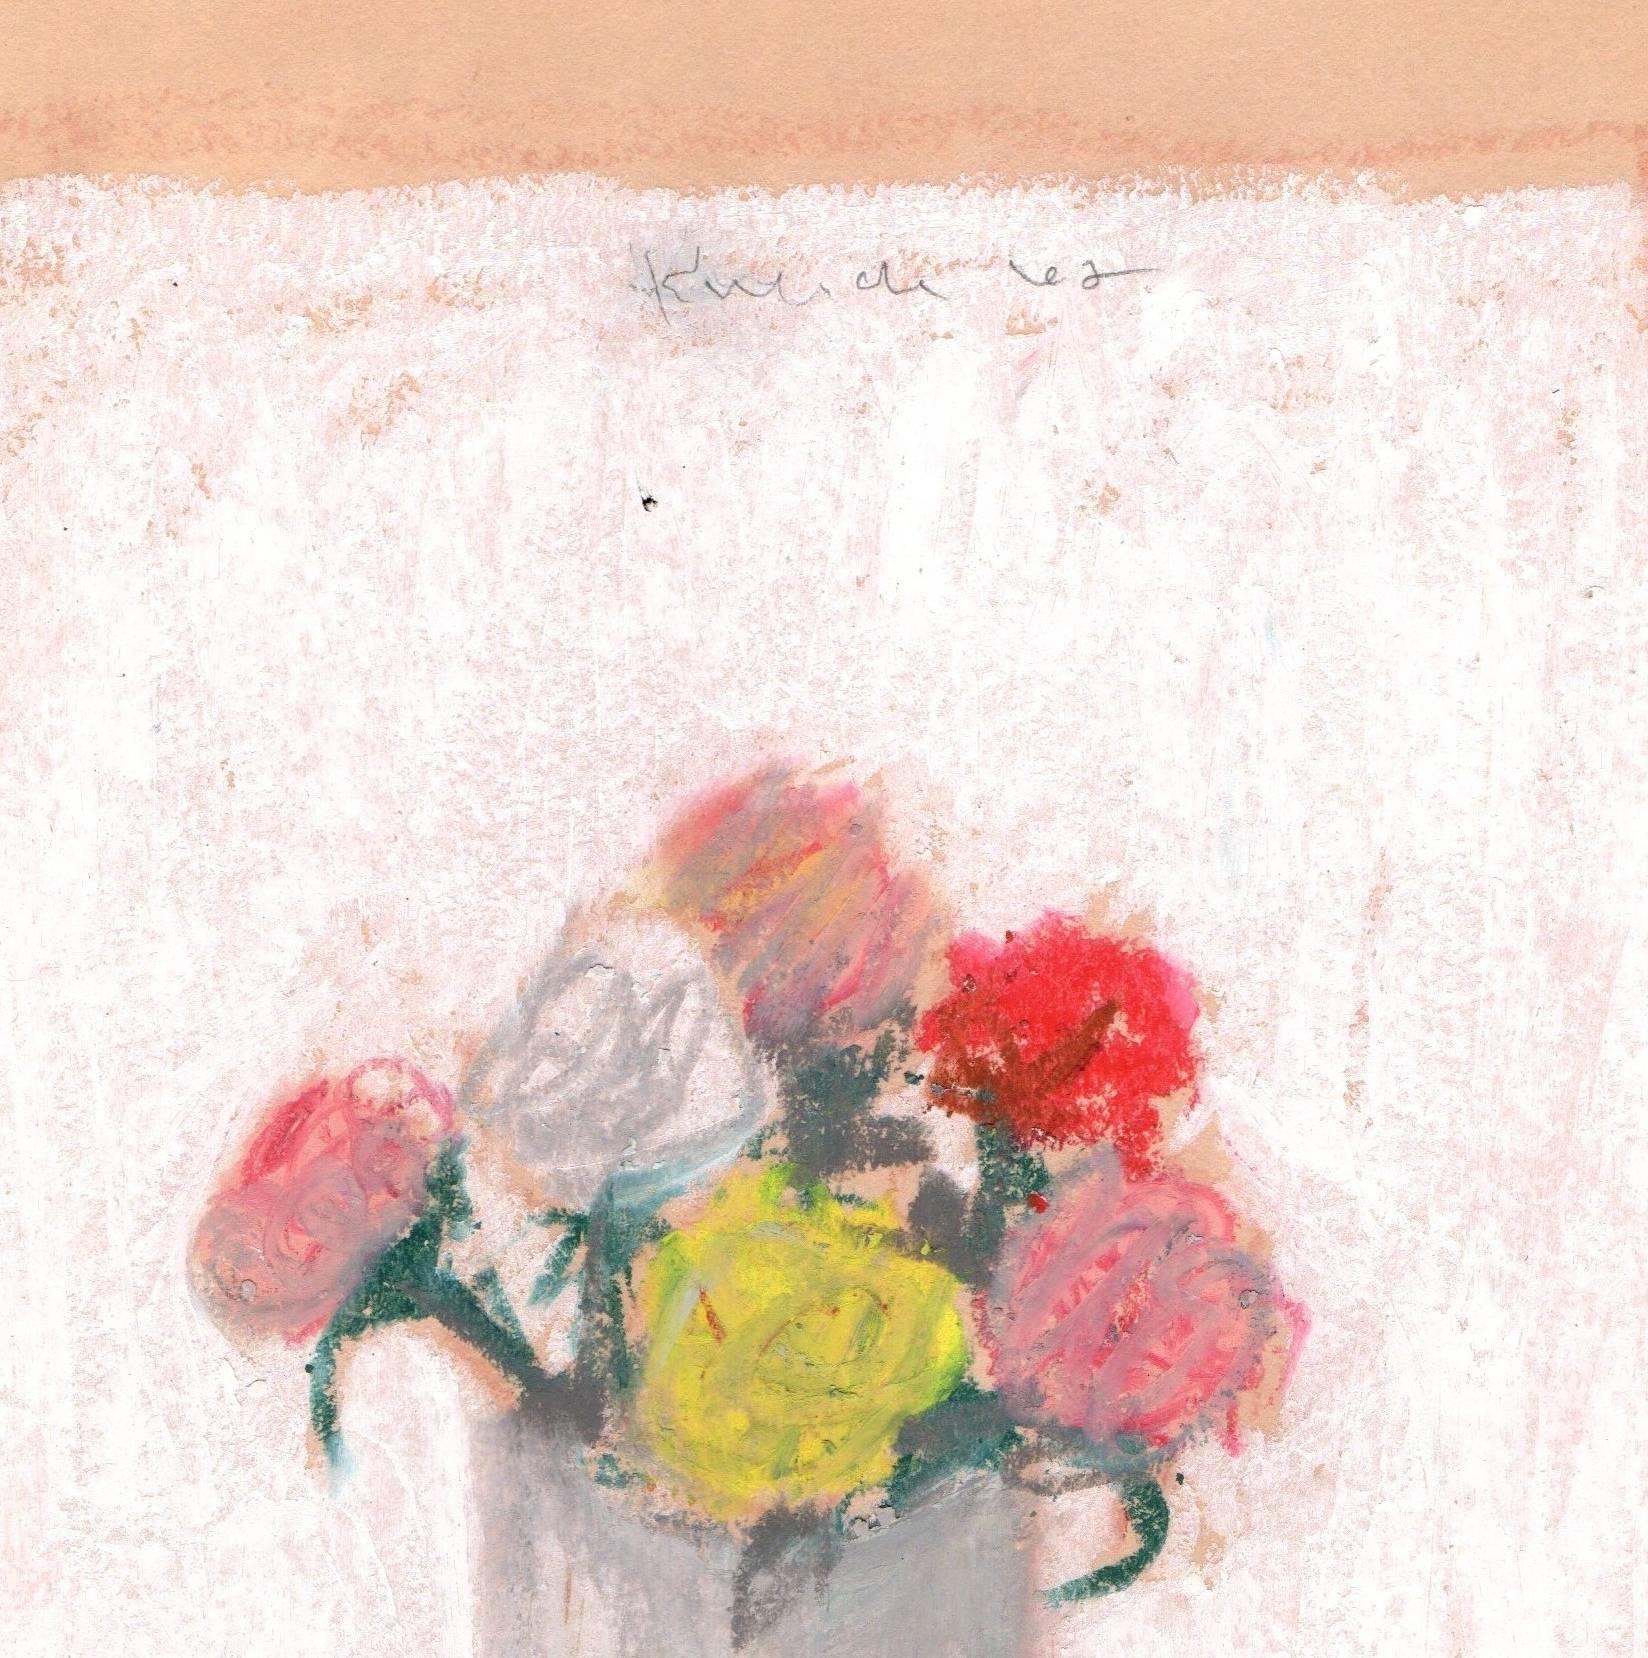 Red, Pink, Yellow, and White Flowers in a Vase Against a White Background - American Modern Art by Robert Kulicke